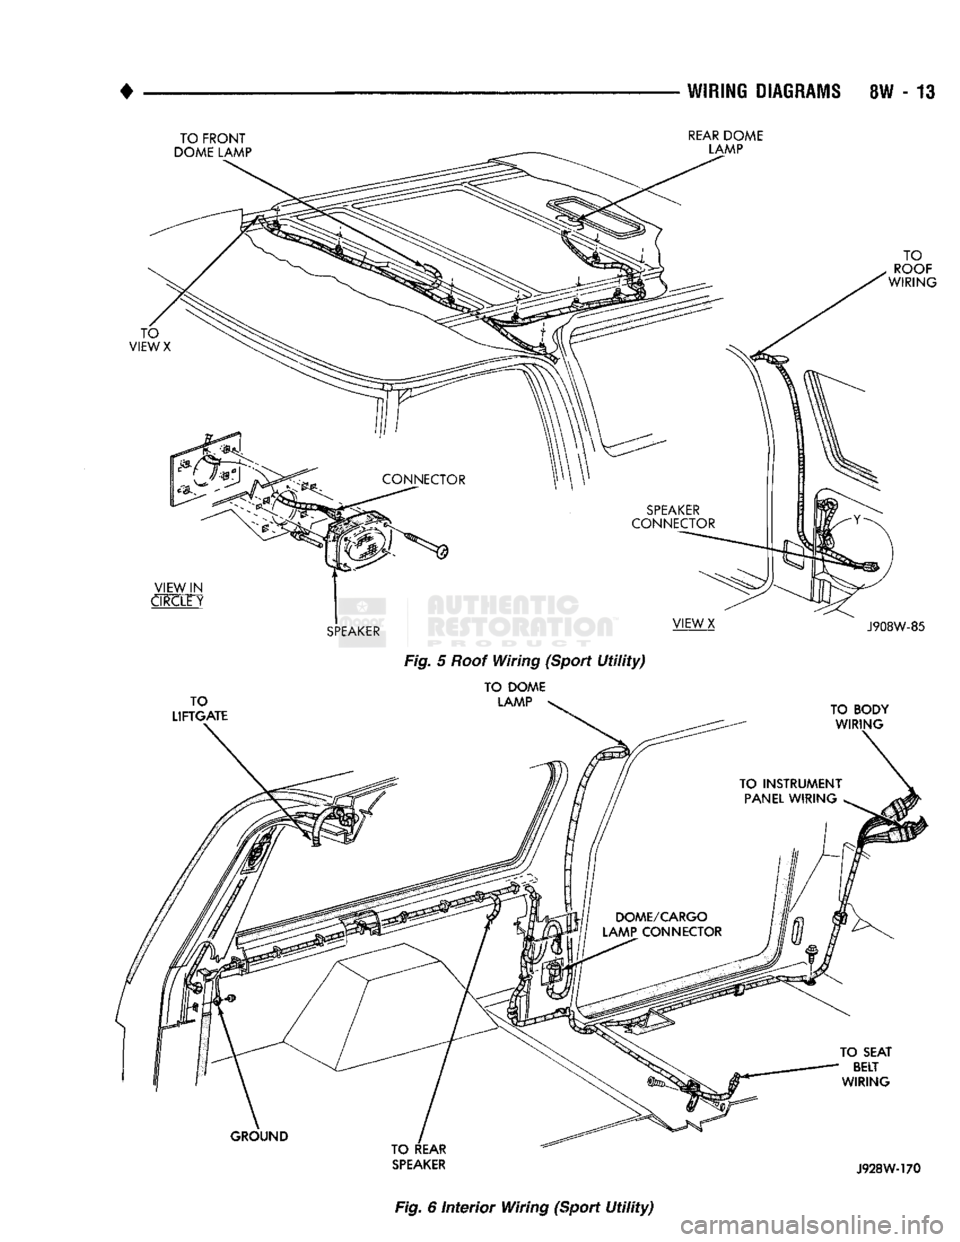 DODGE TRUCK 1993  Service Repair Manual 
WIRING
 DIAGfiAlS
 8W - 13 

TO FRONT 
DOME LAMP 

TO 
VIEW  REAR DOME 

LAMP 

TO 
ROOF 
WIRING 
SPEAKER  VIEWX  J908W-85 
Fig. 5 Roof Wiring (Sport Utility) 

TO 
LIFTGATE 
GROUND  TO DOME 
LAMP  T